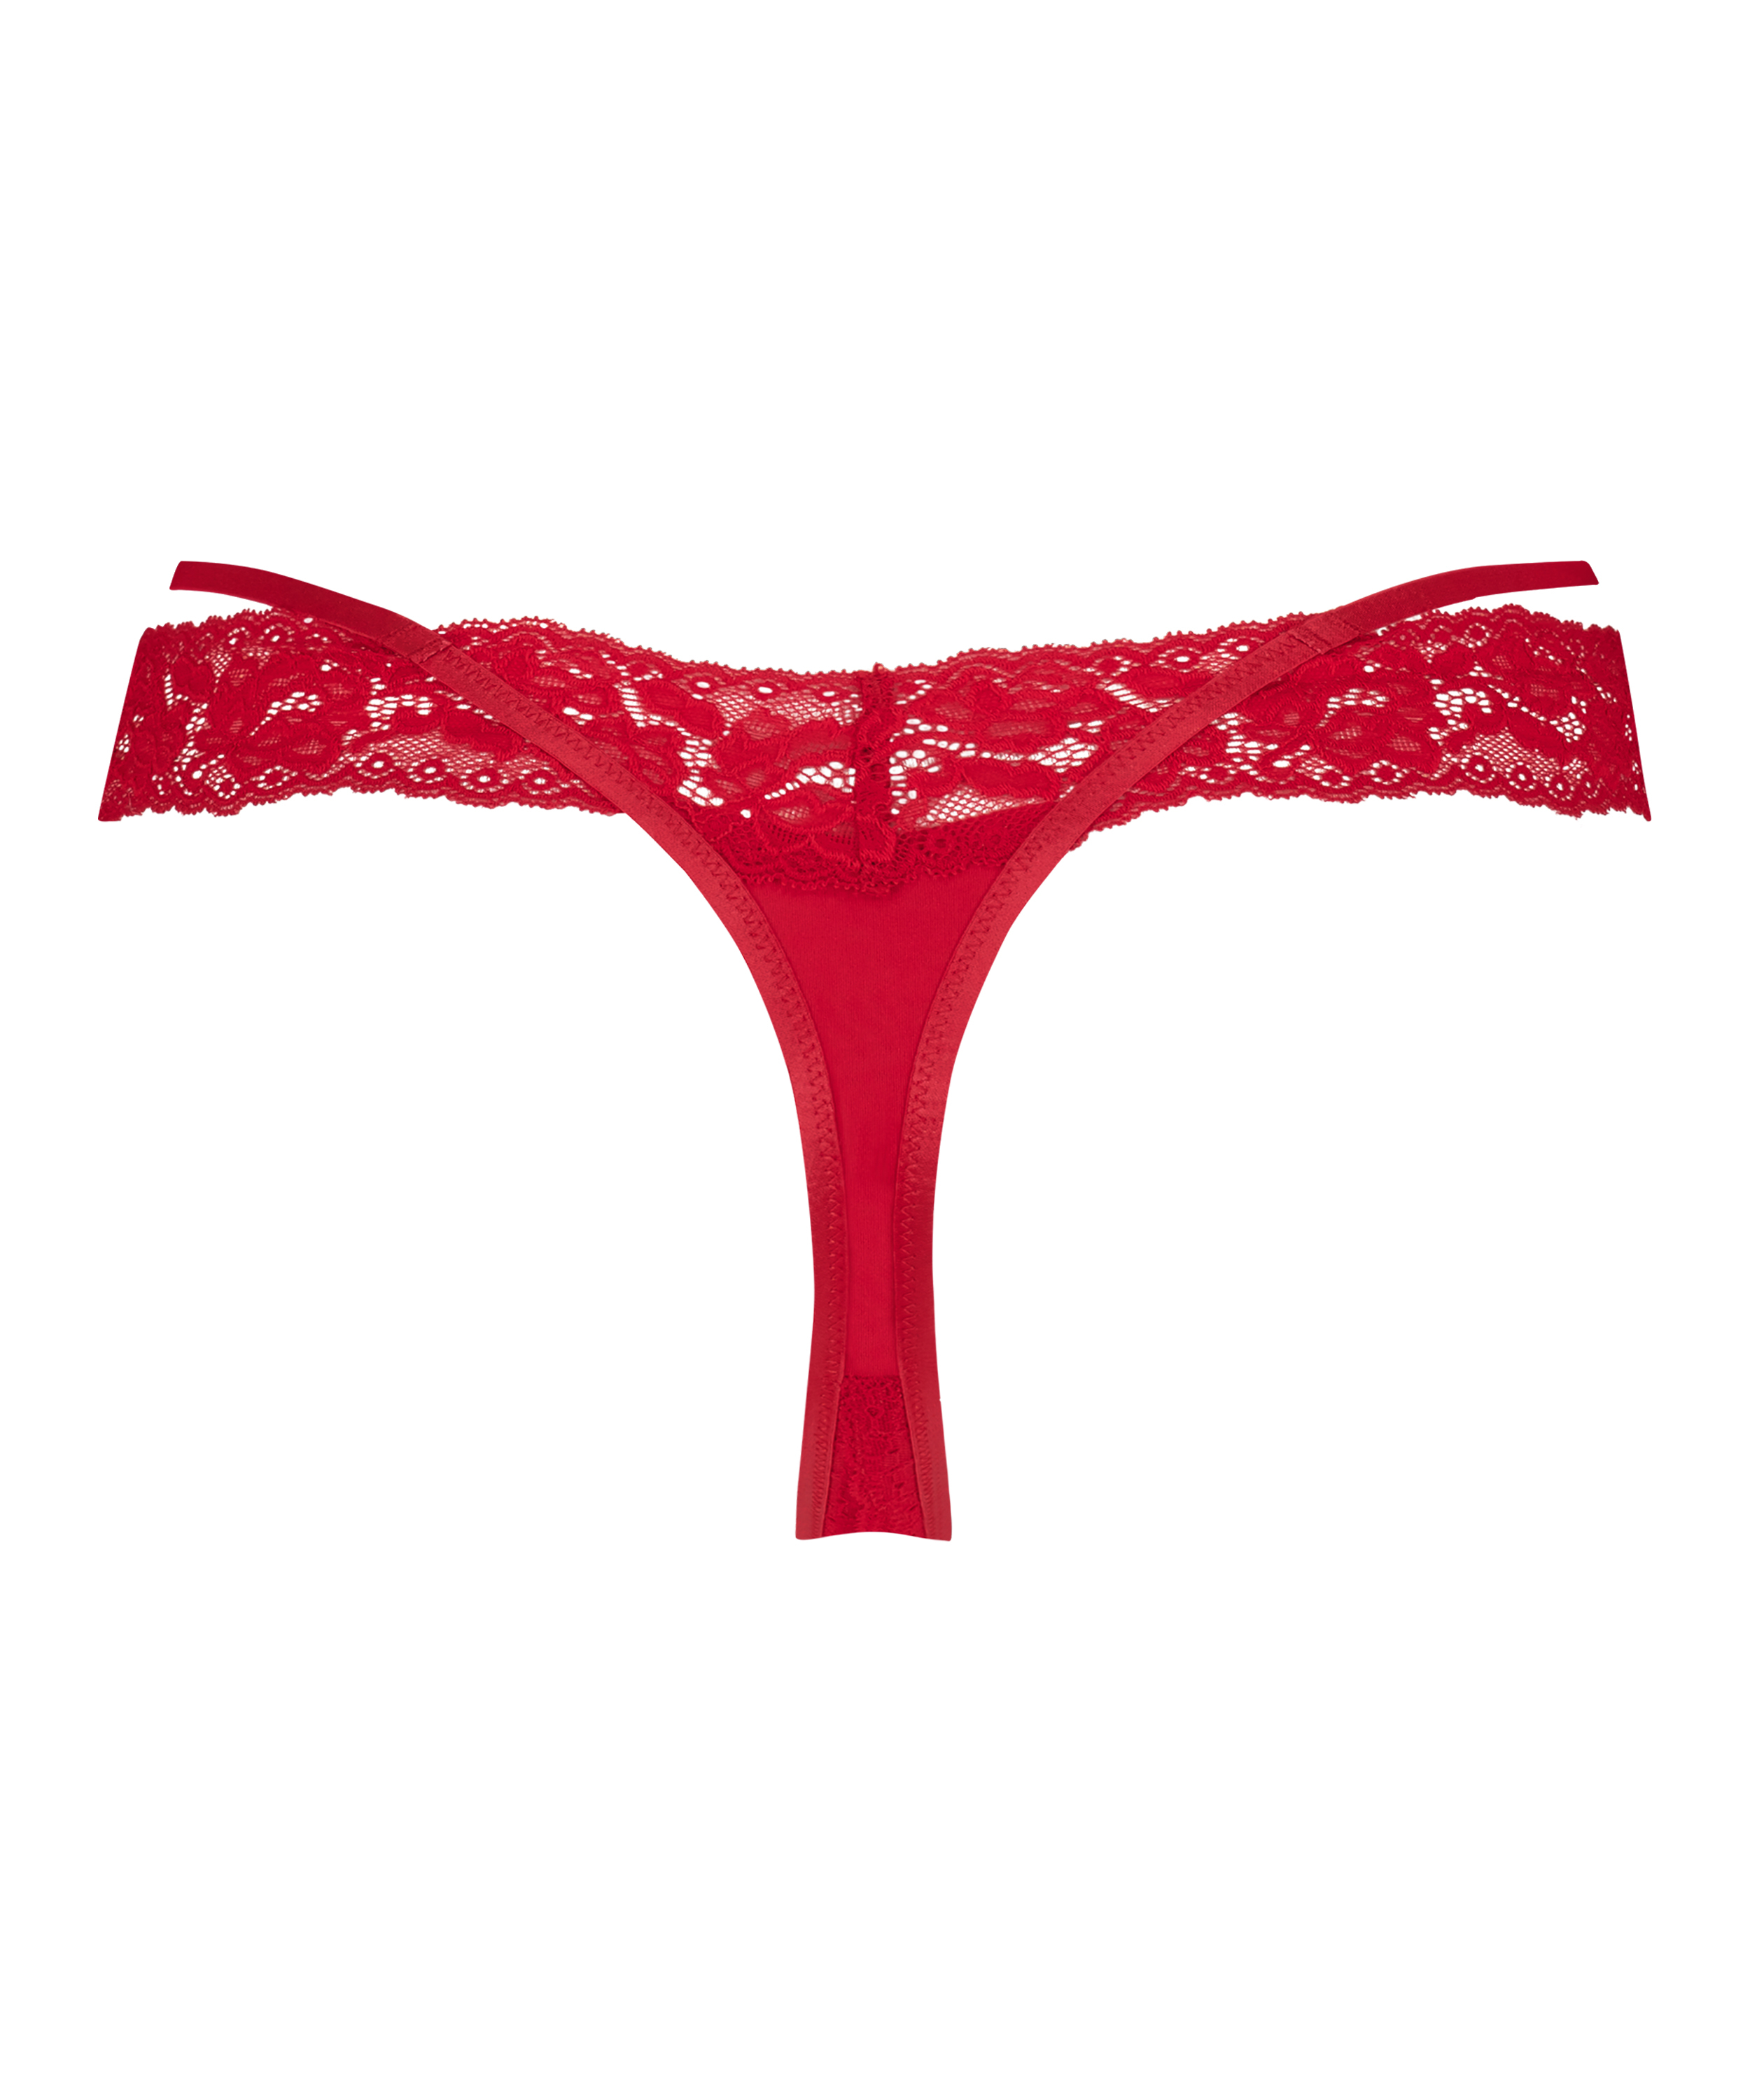 Elliena Extra Low V Thong, Red, main